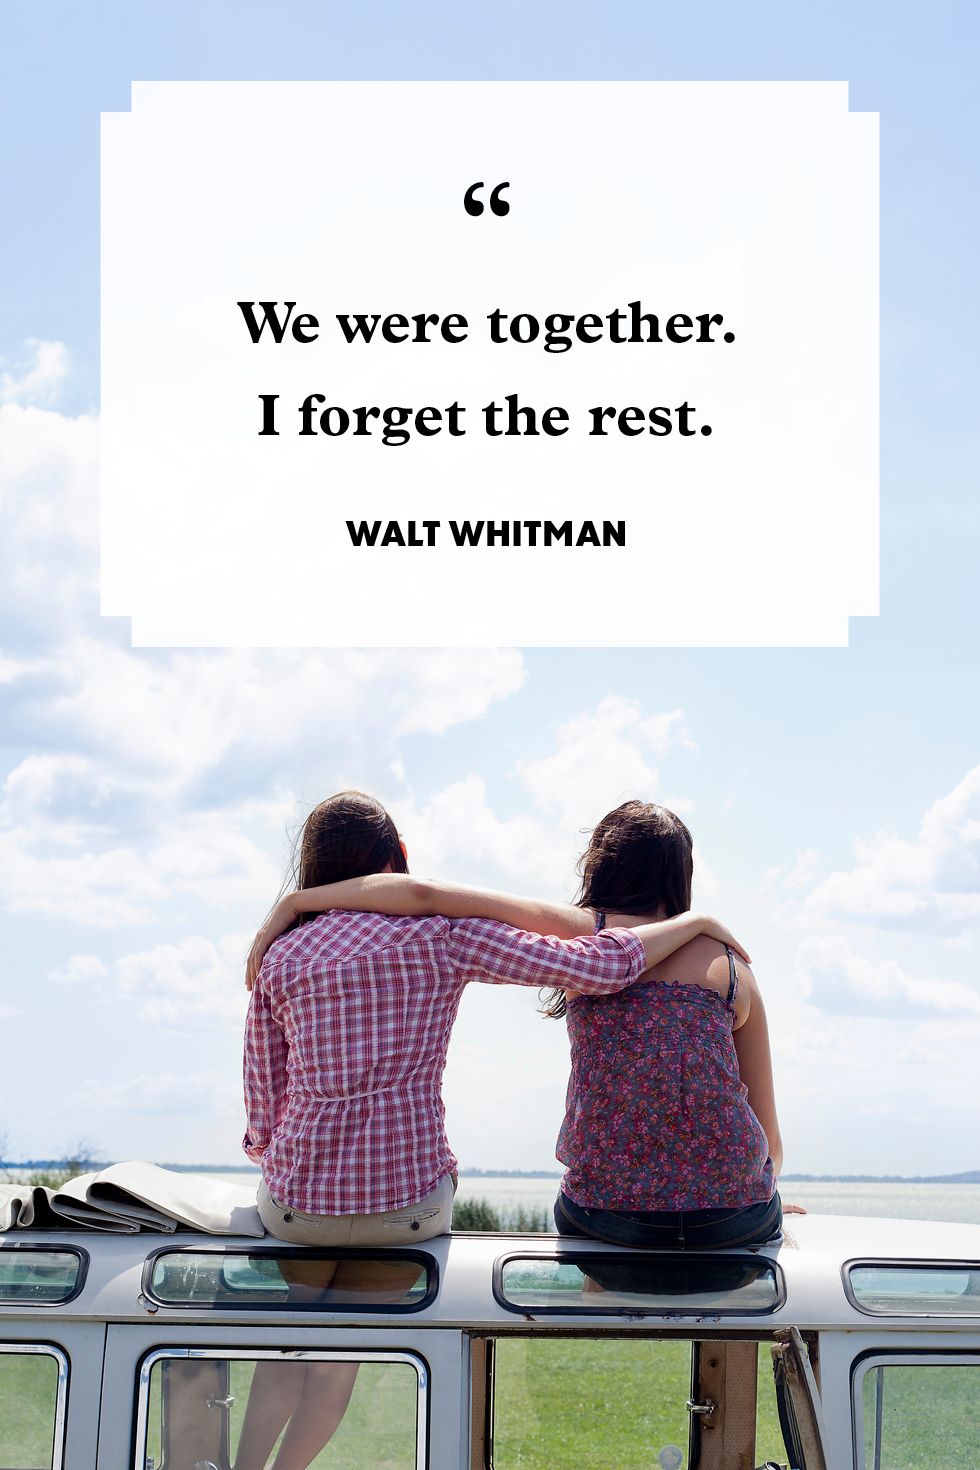 25 Friendship Quotes to Share With a Best Friend